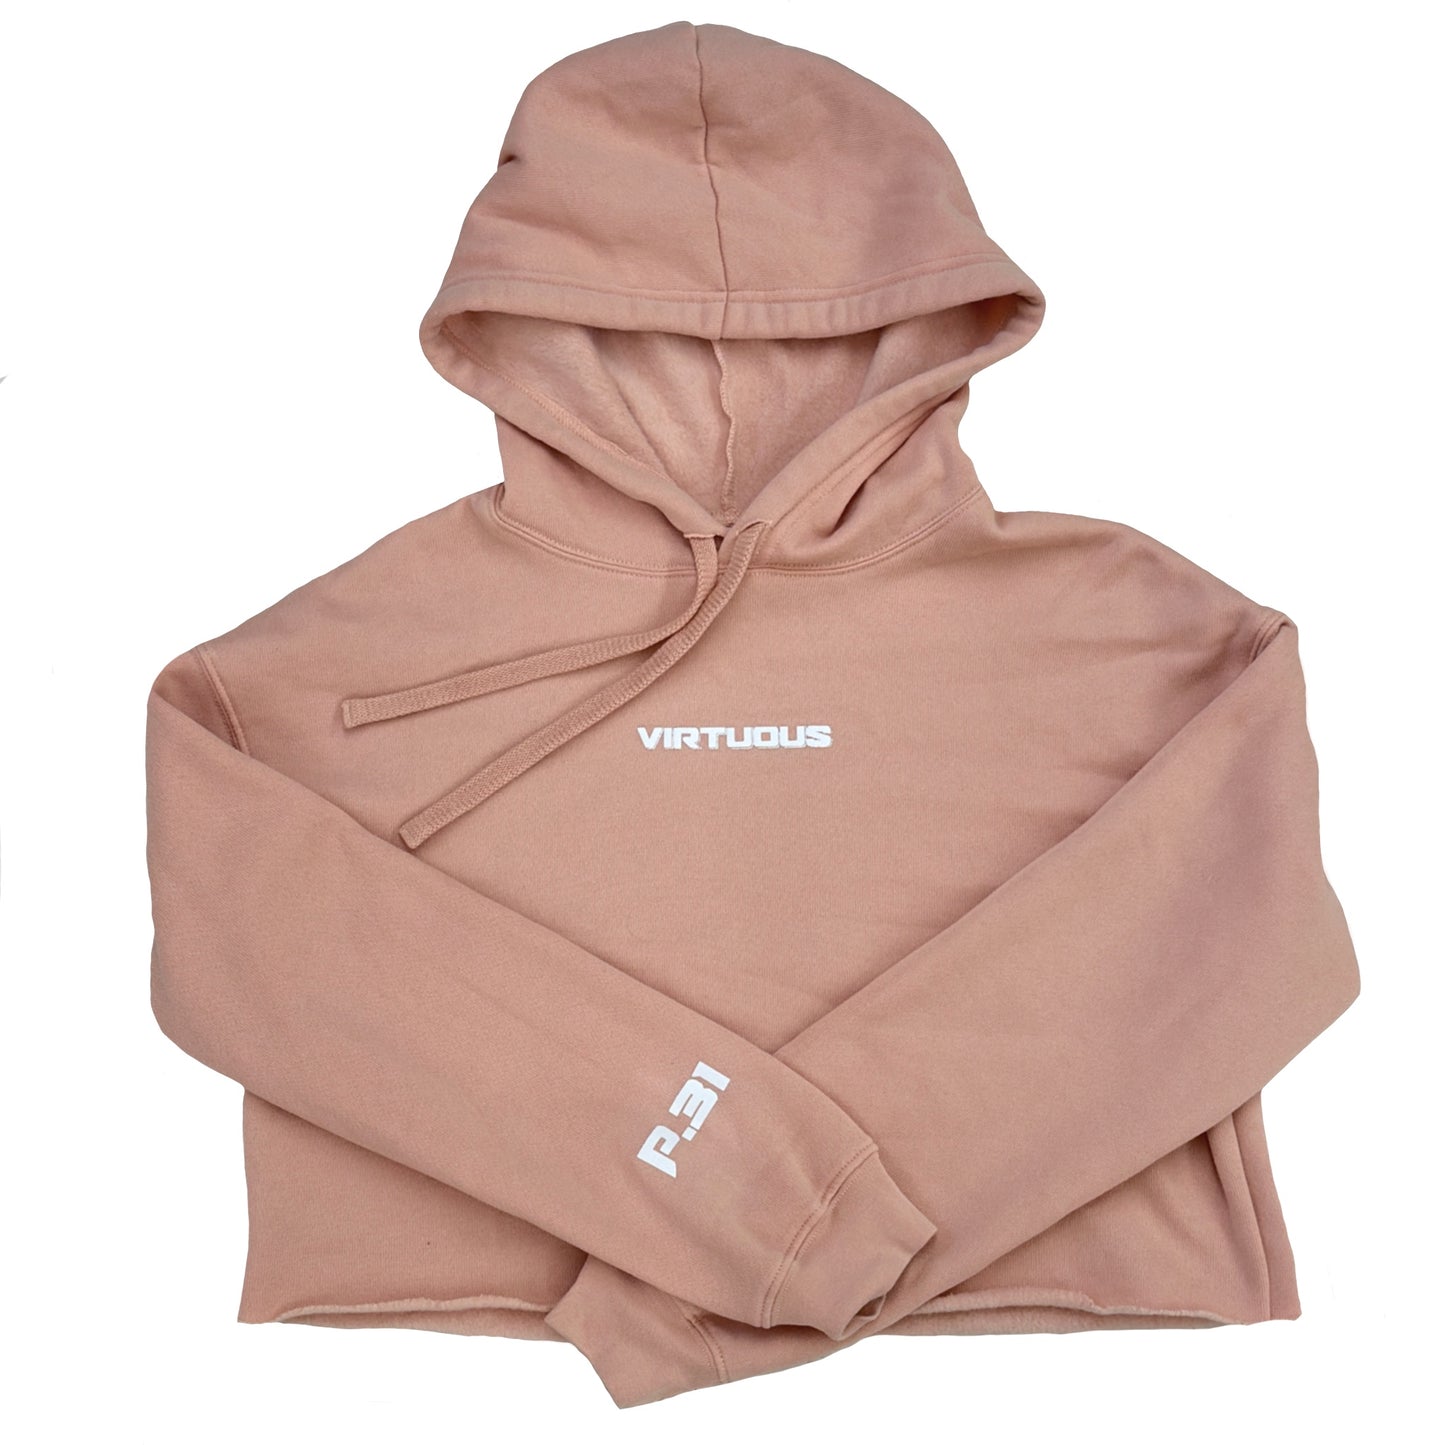 Virtuous Cropped Hoodie